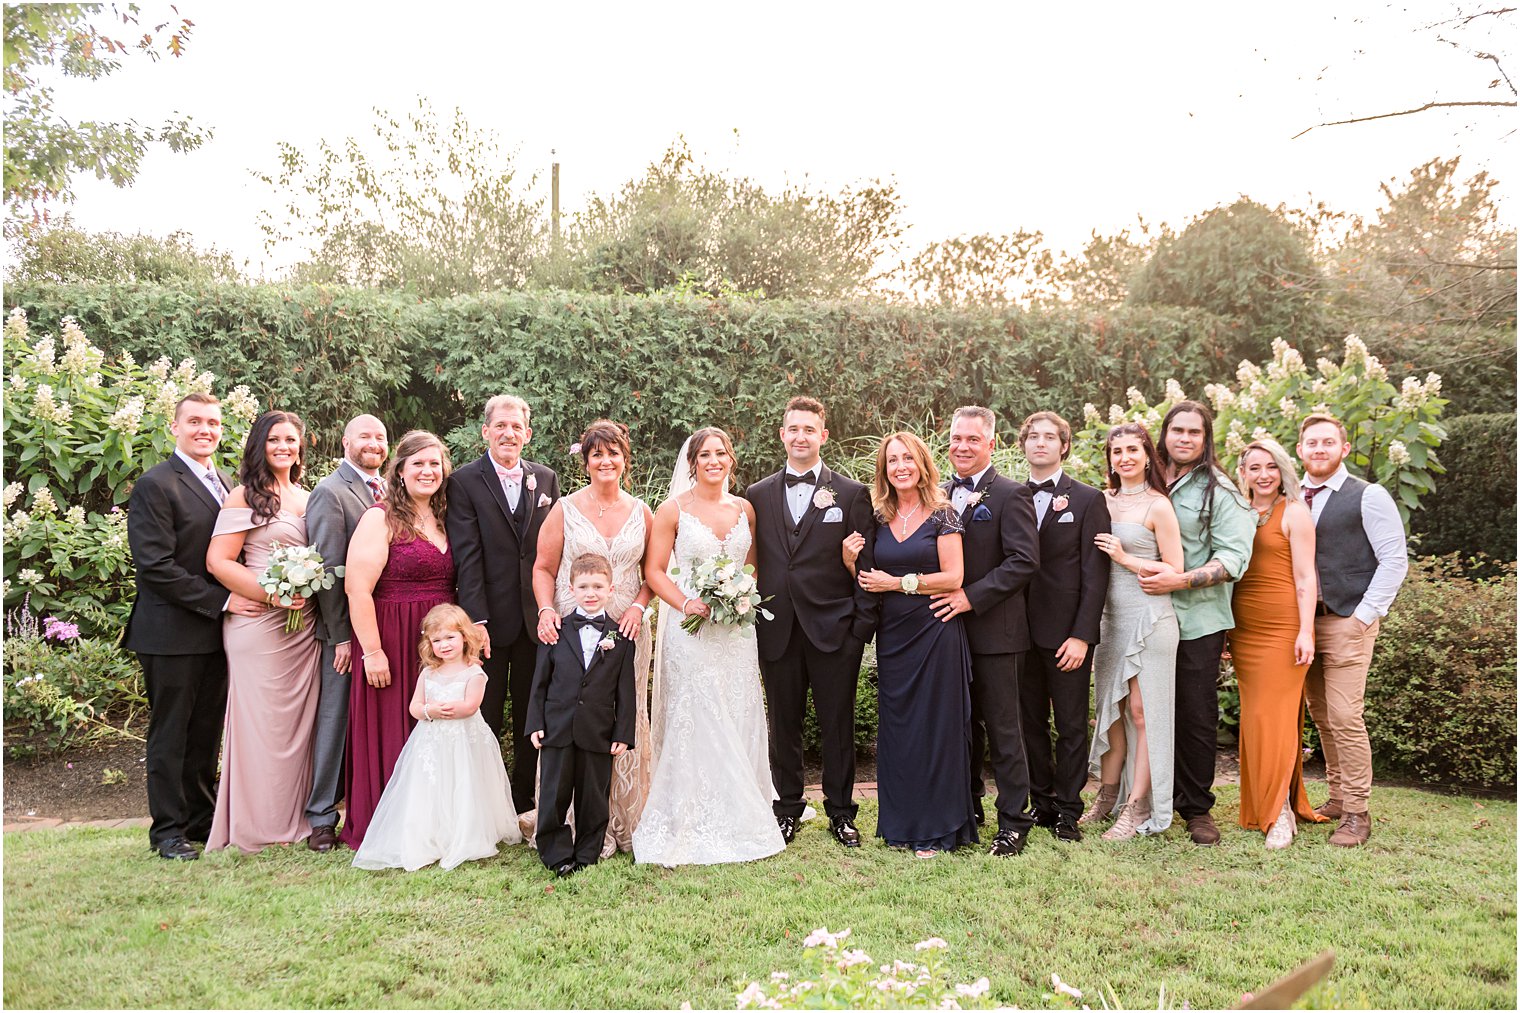 family stands with bride and groom in gardens at The Inn at Fernbrook Farms